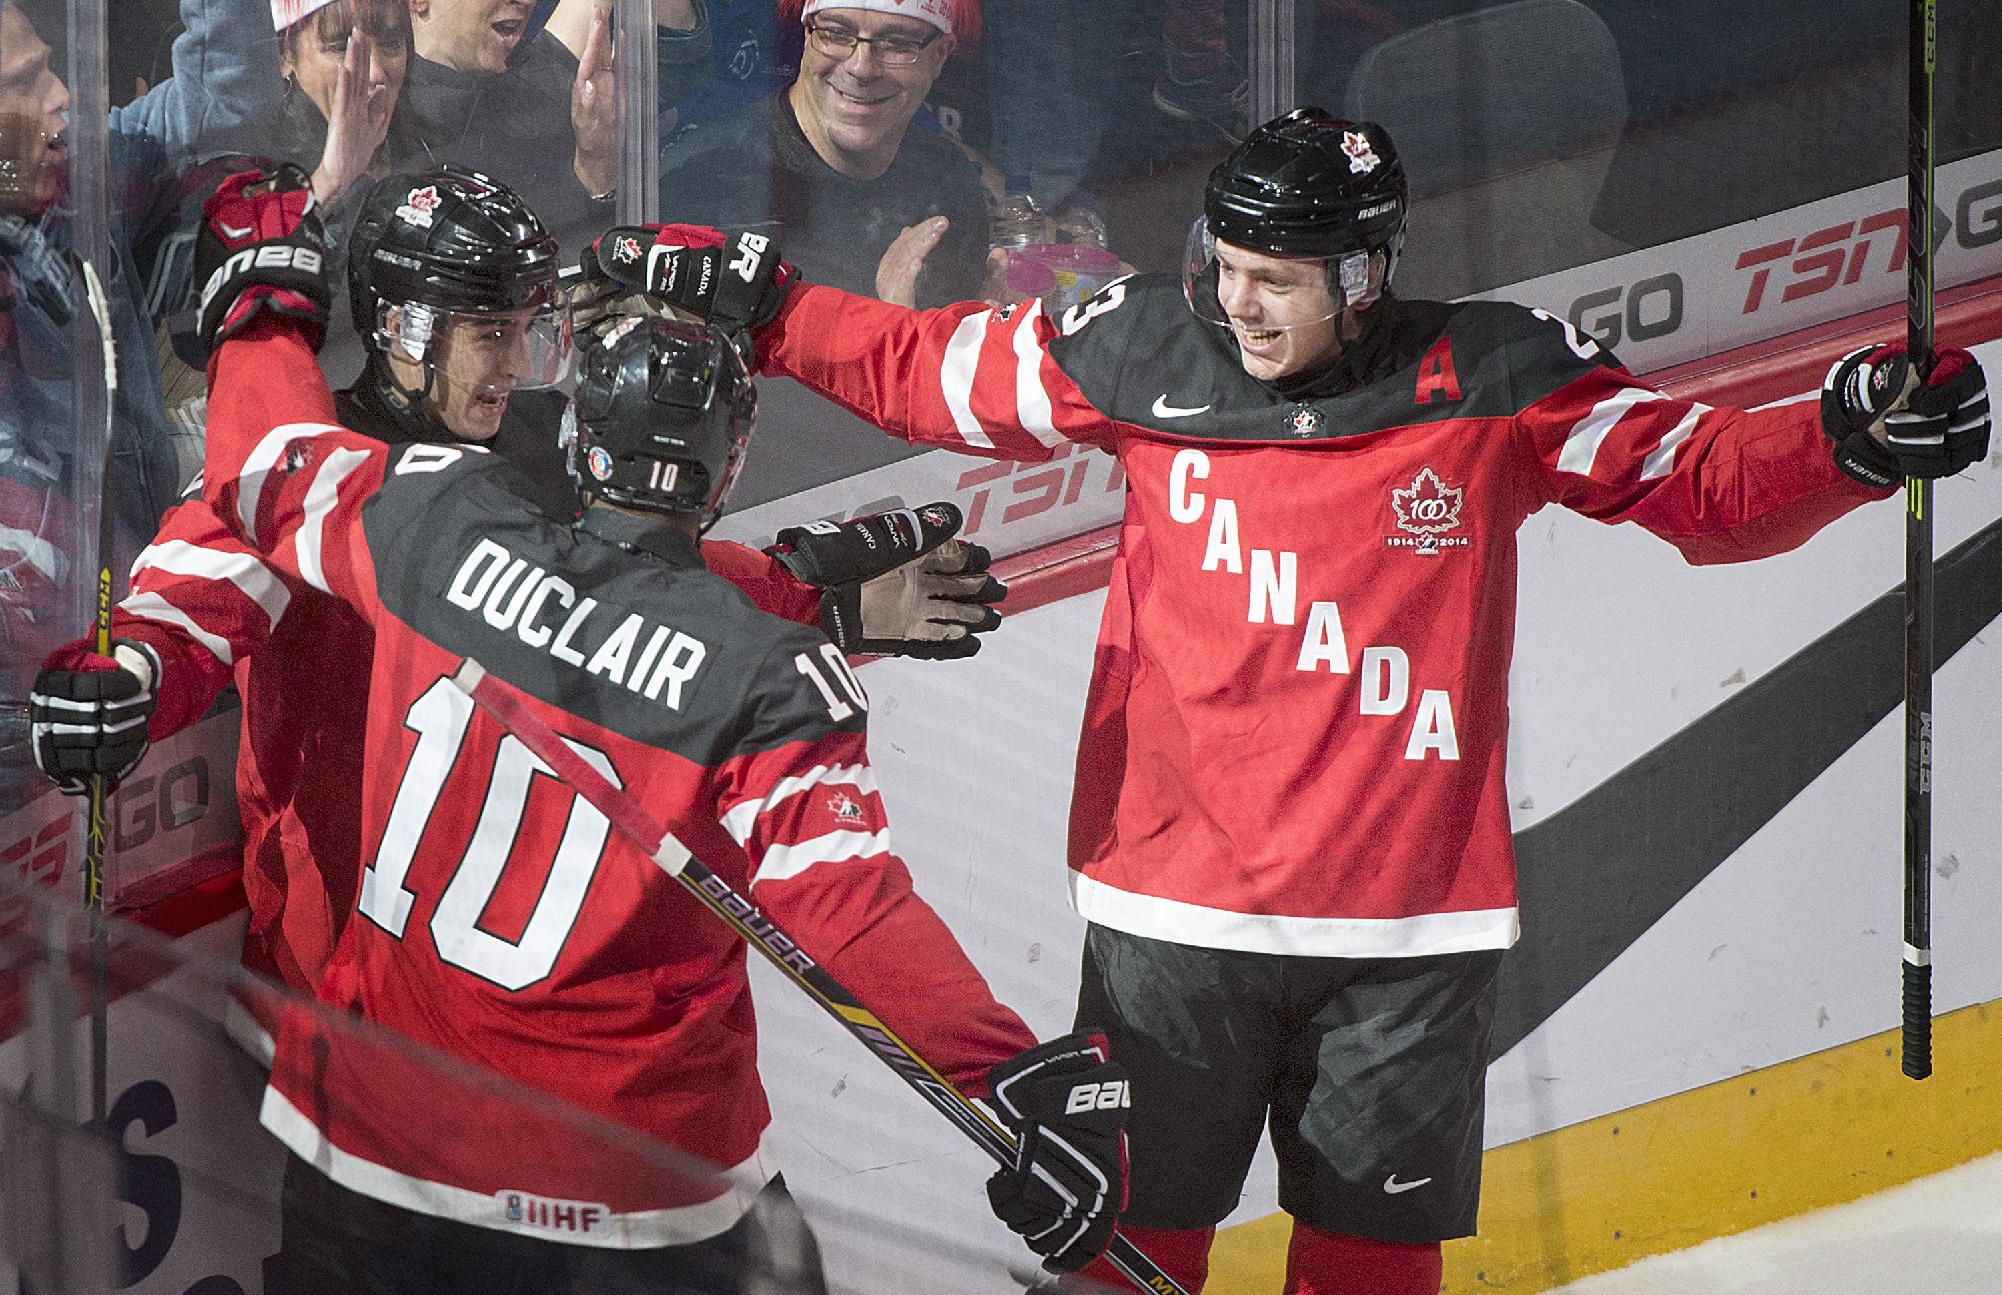 Canada's Robby Fabbri, left, celebrates with teammates Anthony Duclair and Sam Reinhart, right, after scoring against Slovakia during the first period of a round-robin game at the hockey World Junior Championship, Friday, Dec. 26, 2014, in Montreal. (AP Photo/The Canadian Press, Graham Hughes)